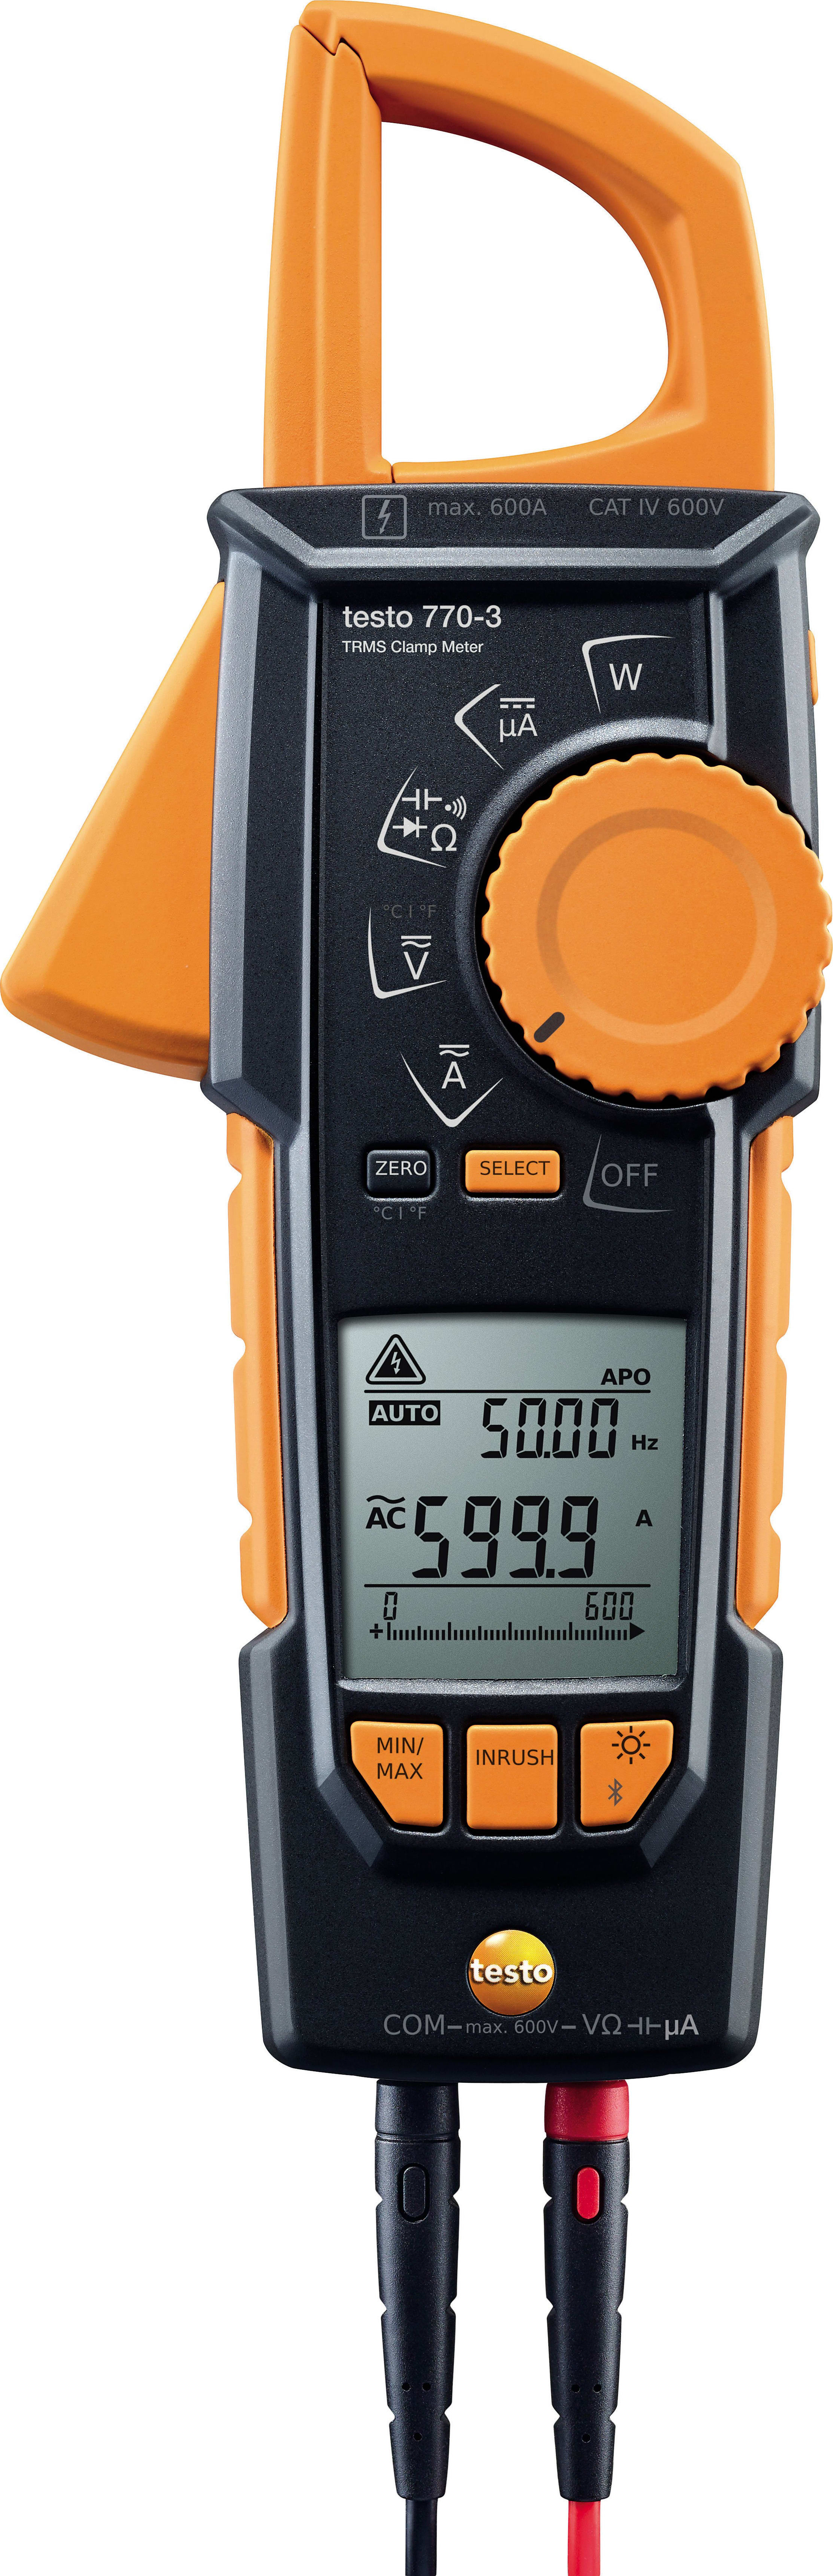 Testo 770-3 - TRMS Clamp Meter with Bluetooth (Part Number 0590 7703)